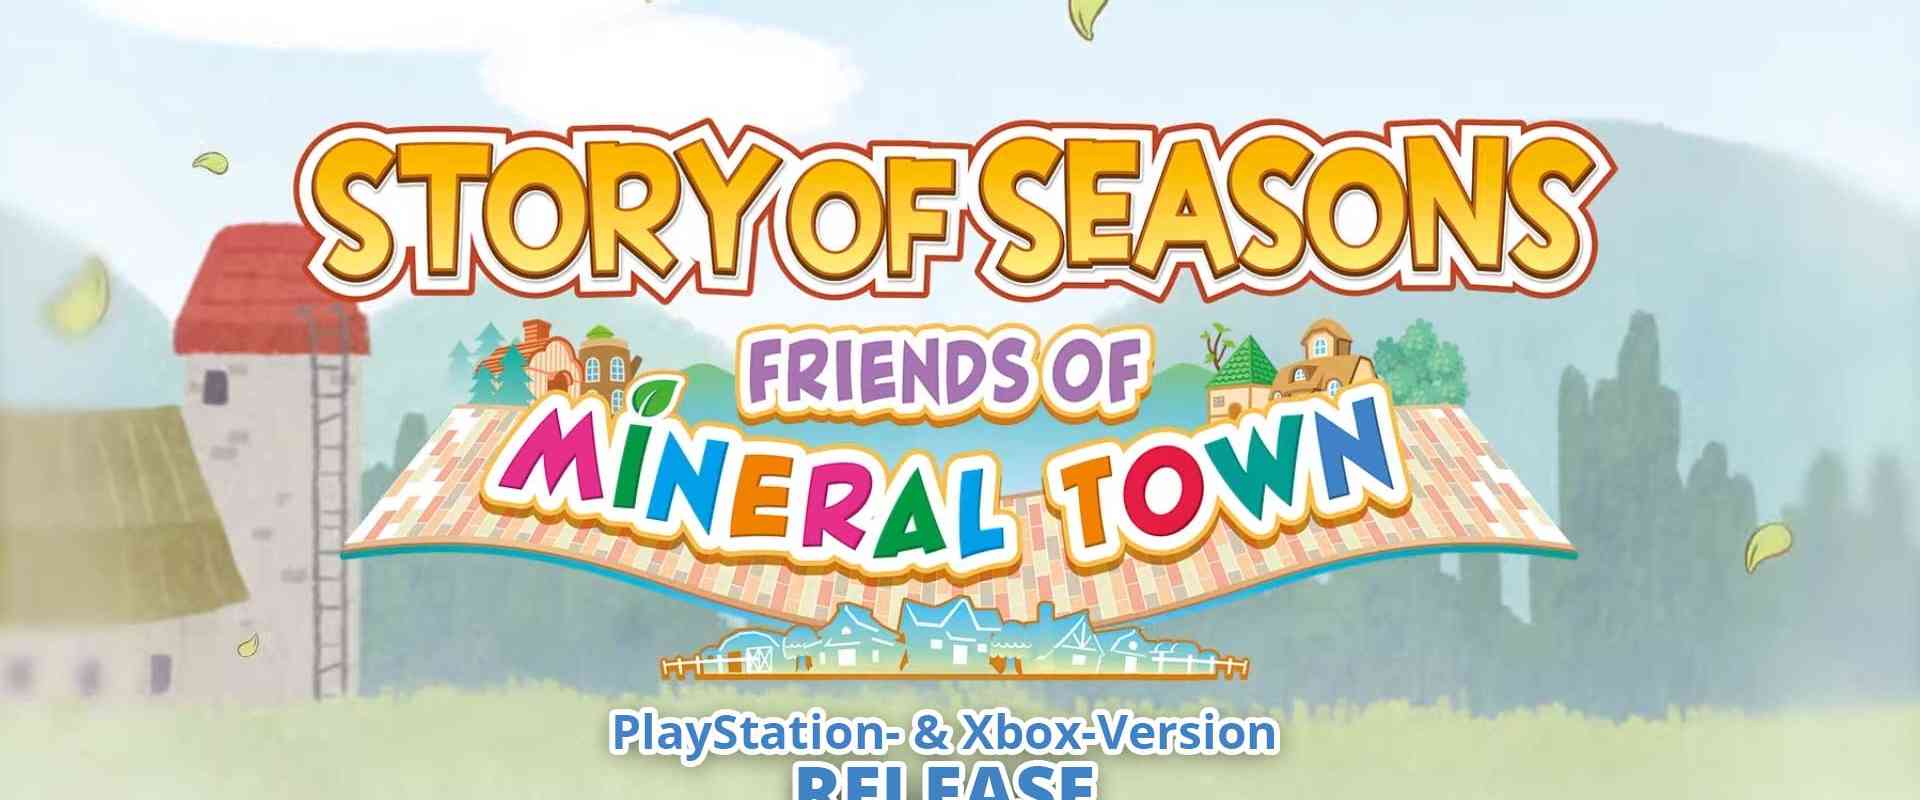 story of seasons friends of mineral town xbox playstation